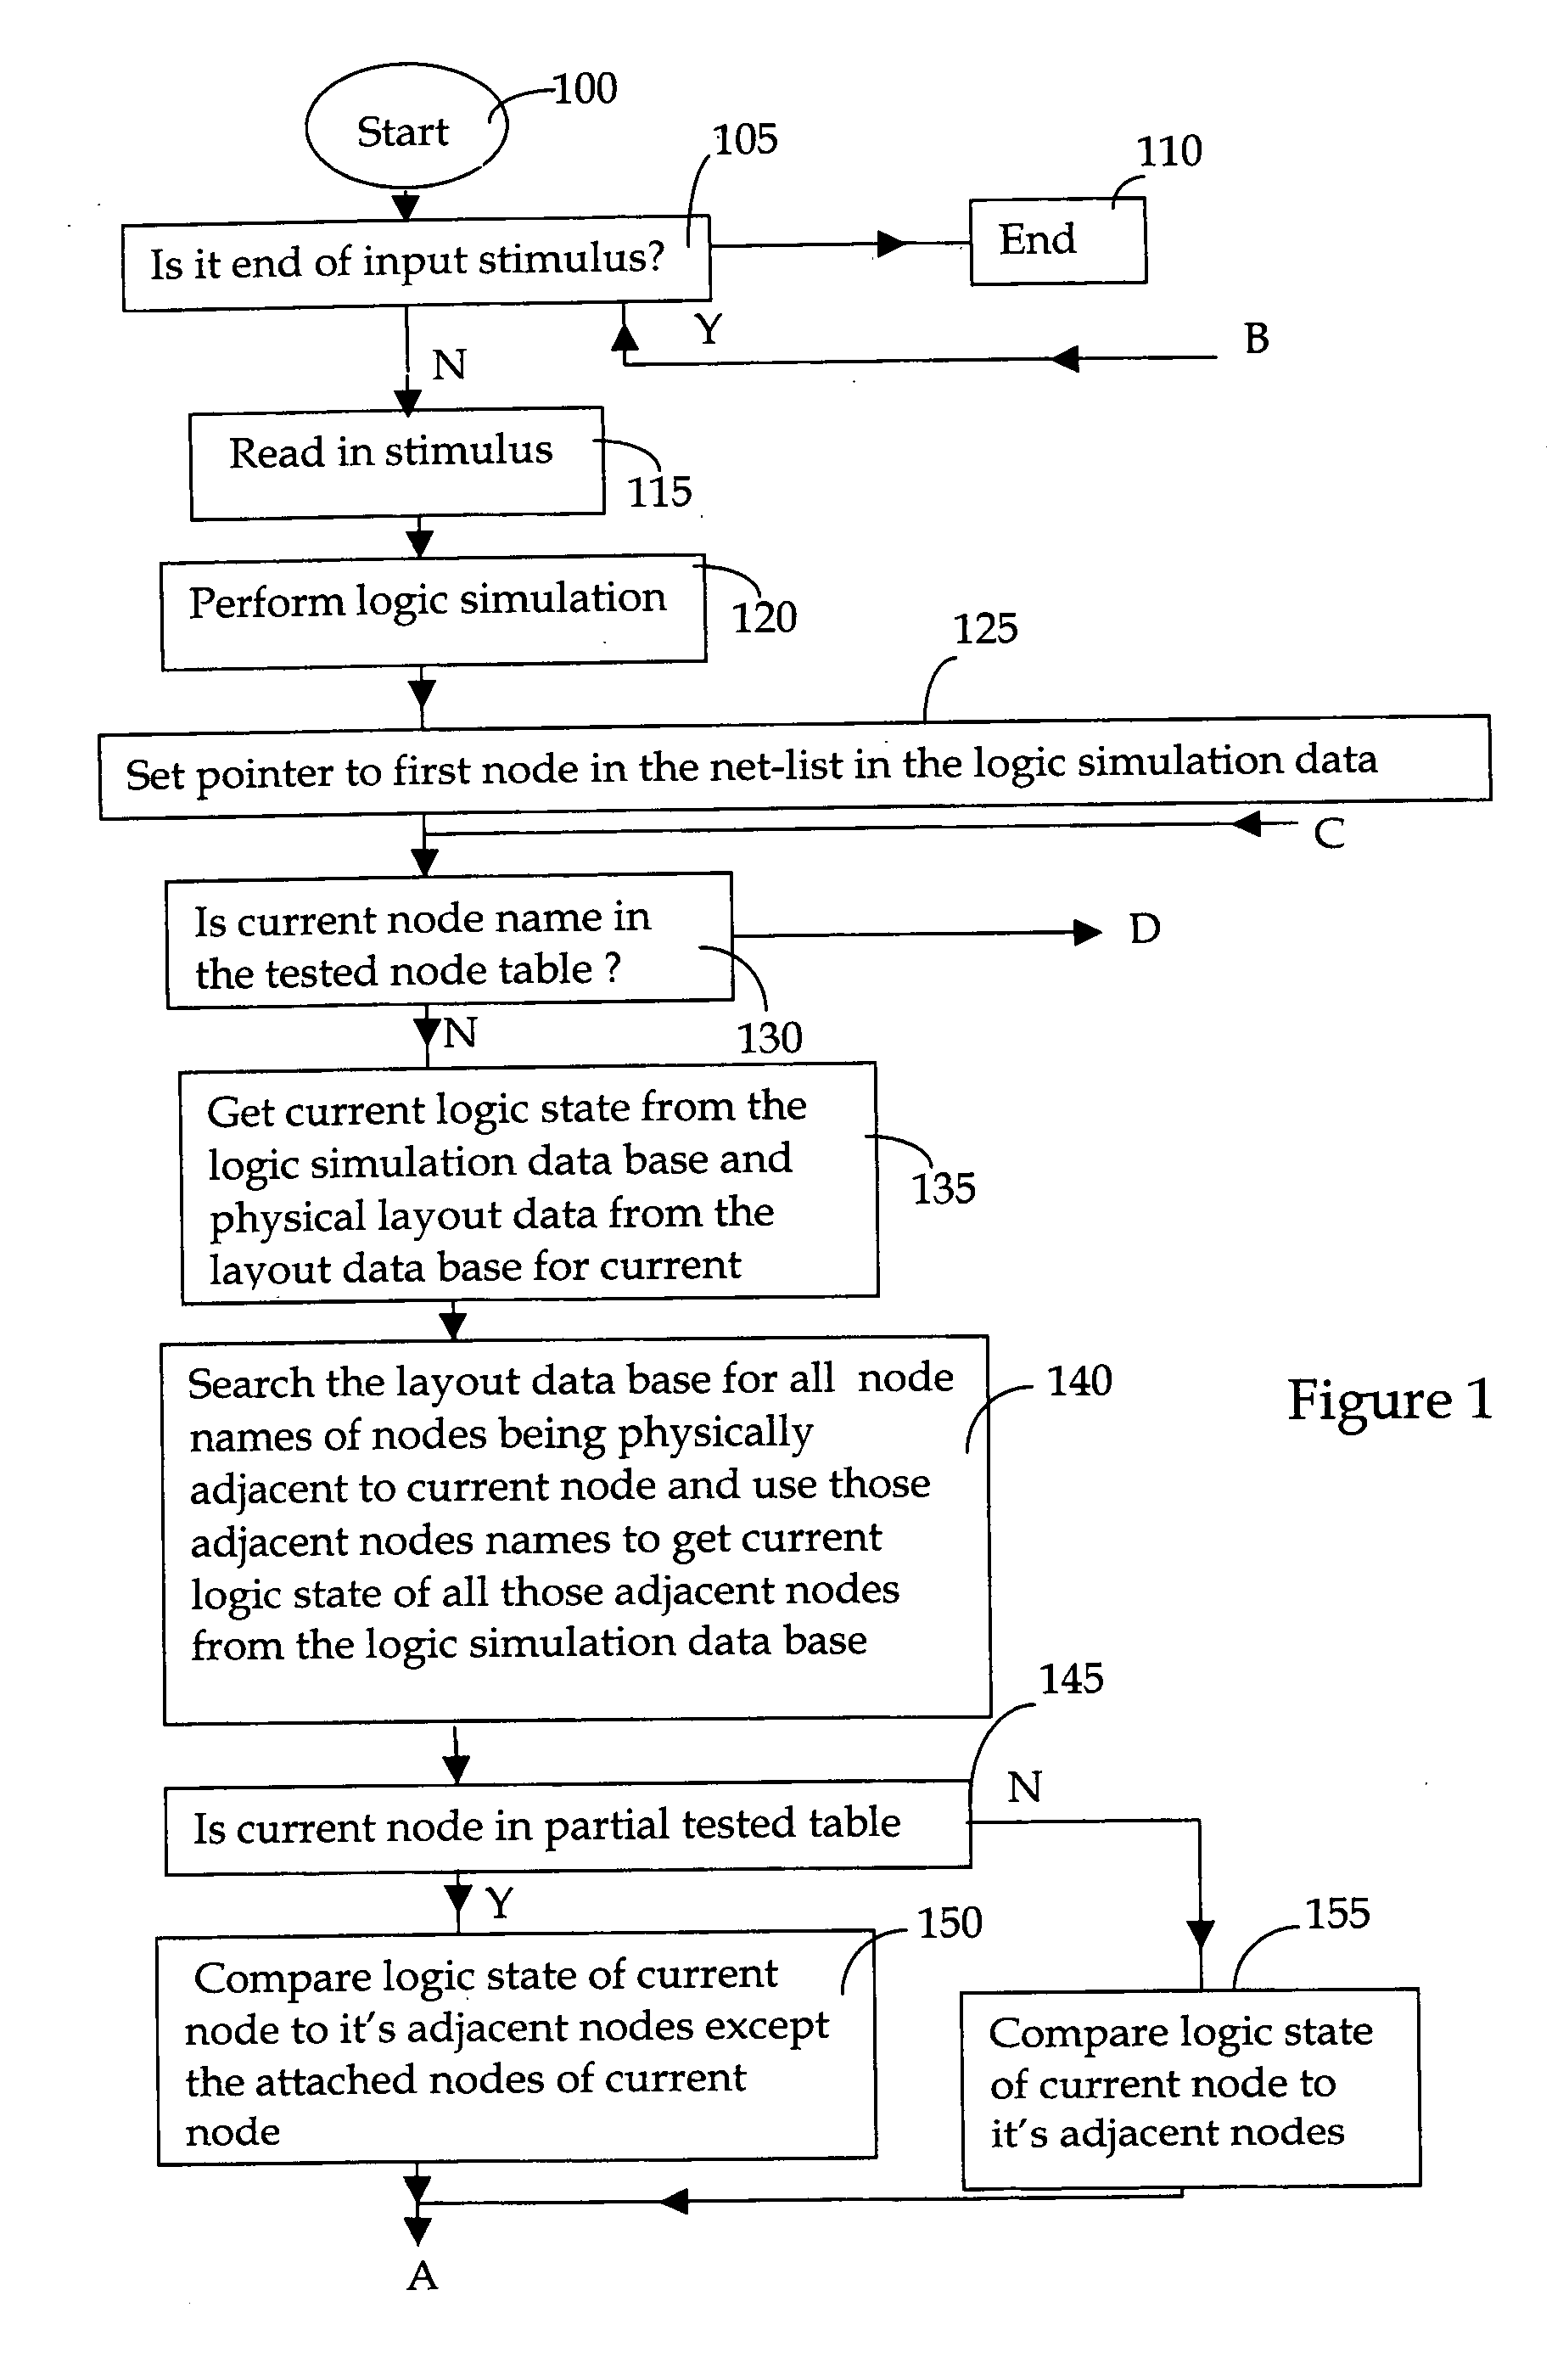 Generation of test vectors for testing electronic circuits taking into account of defect probability